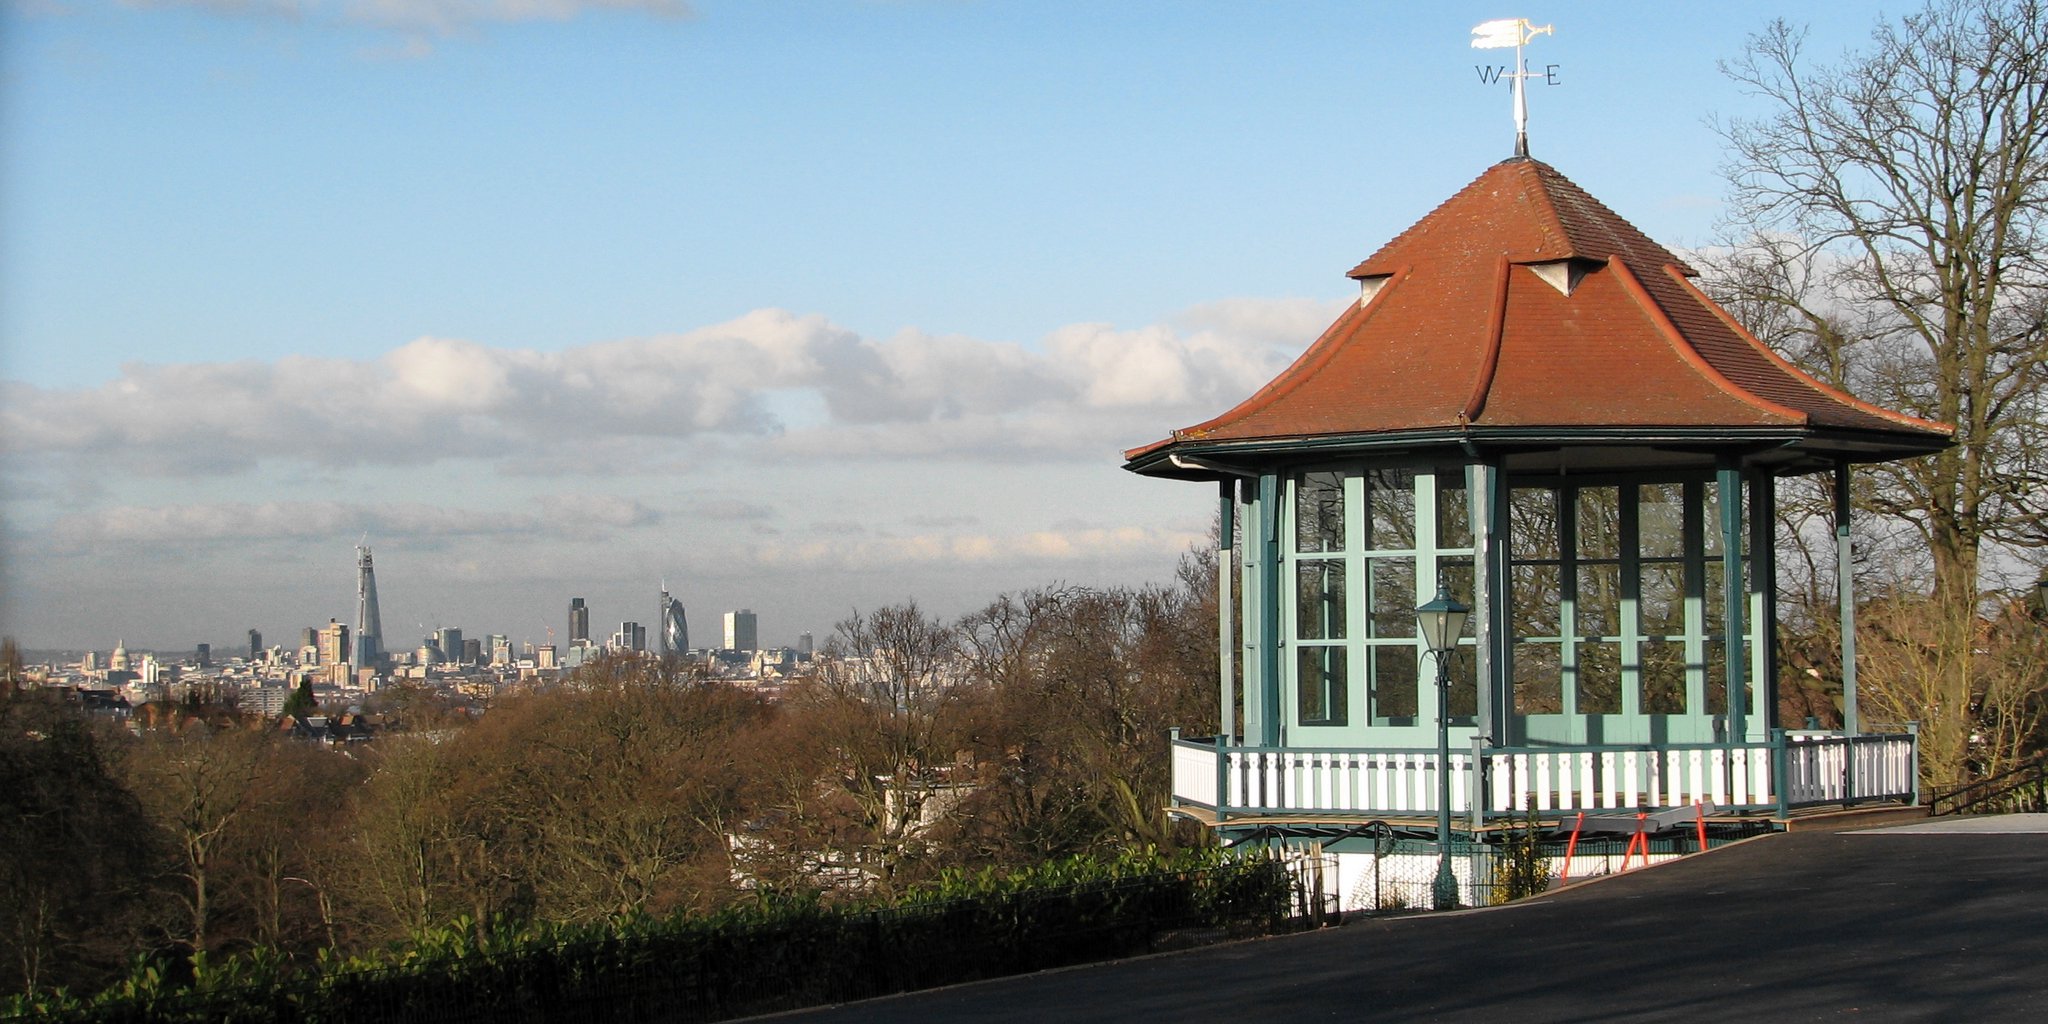 Horniman bandstand skyline. Pic: Wikimedia Commons